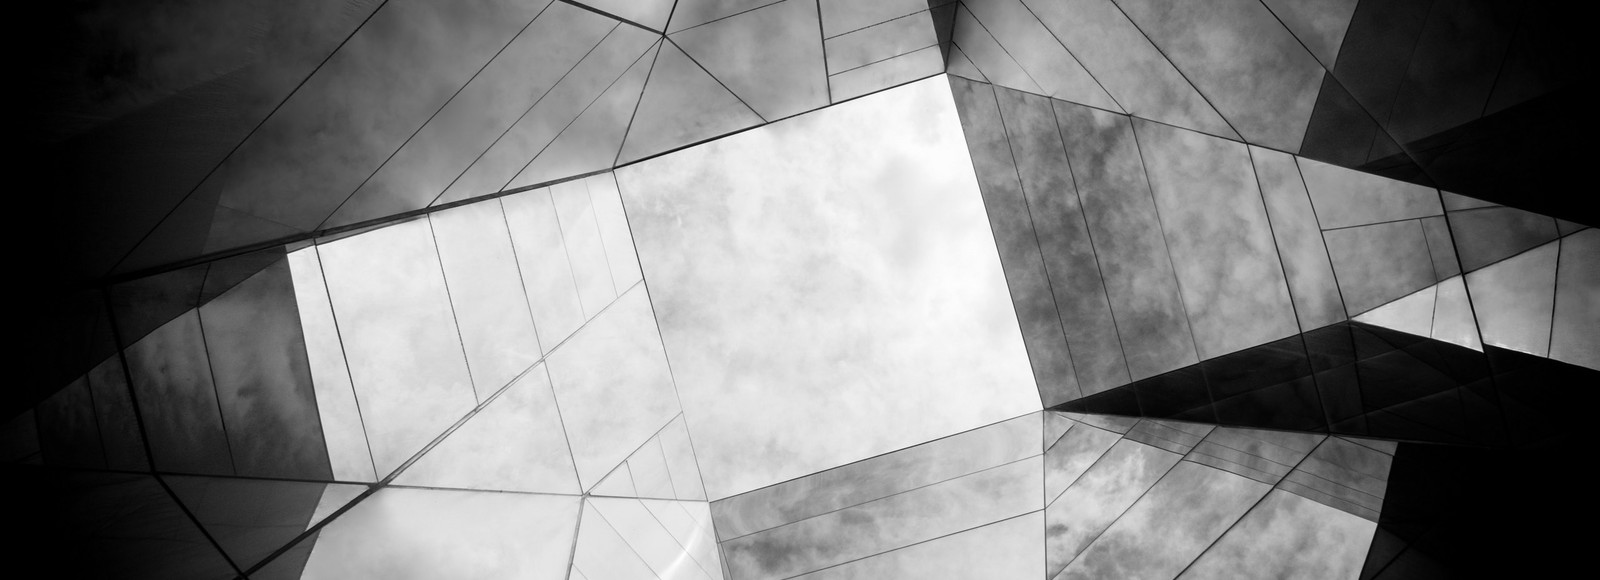 Abstract architectural shapes